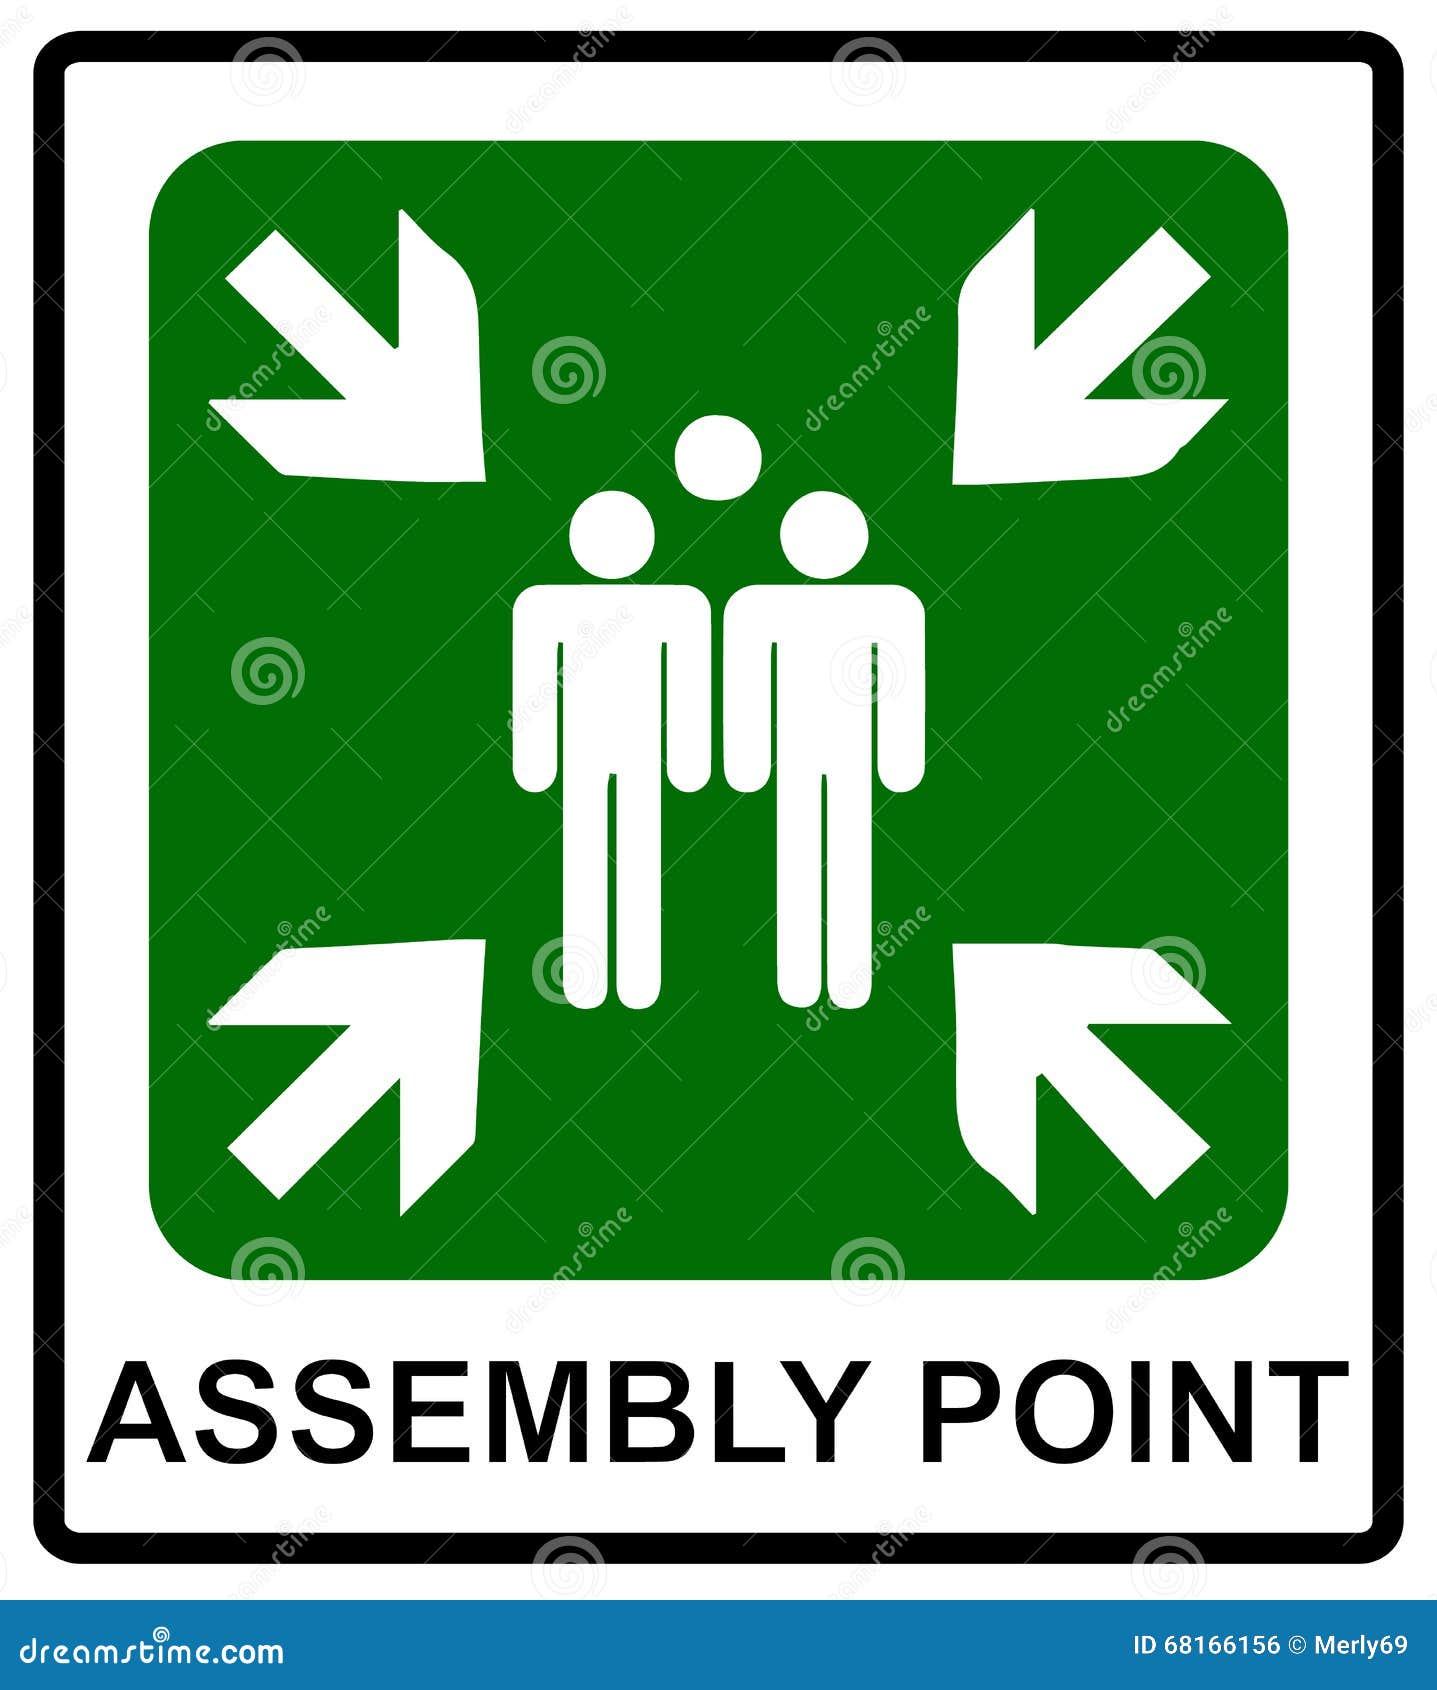 fire emergency icons.  . fire assembly point.